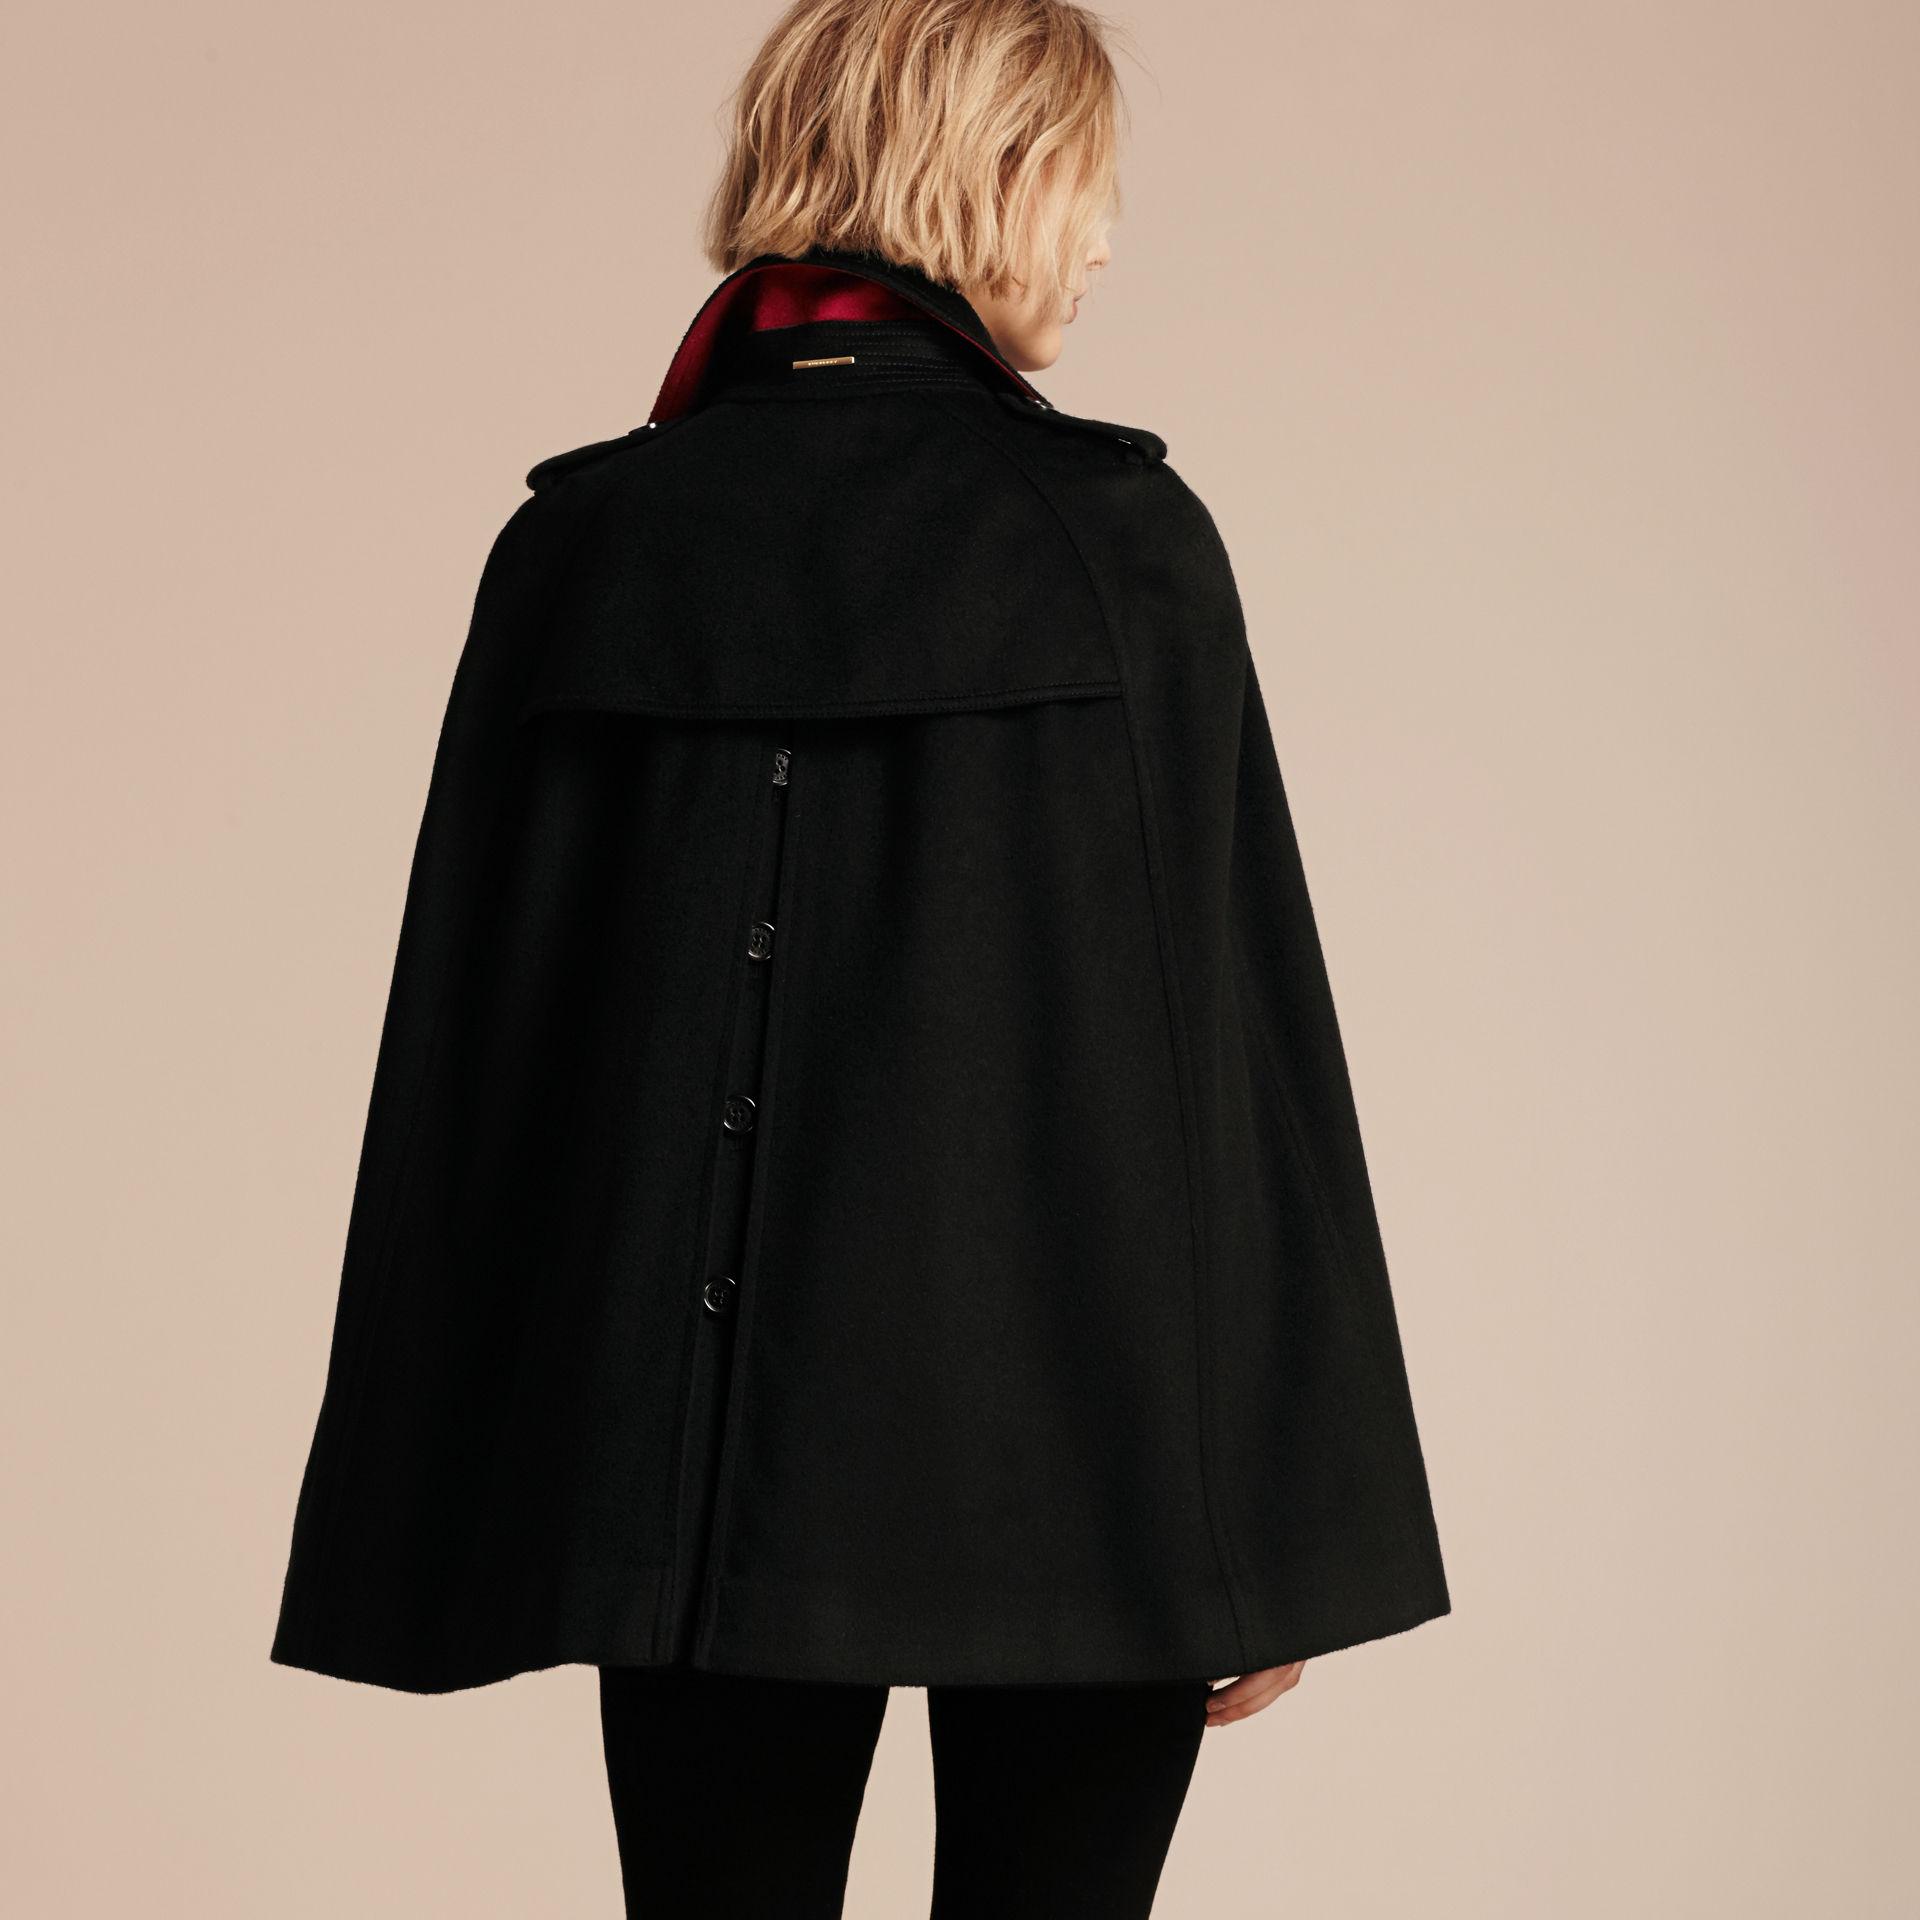 Lyst - Burberry Cashmere Military Cape Coat in Black